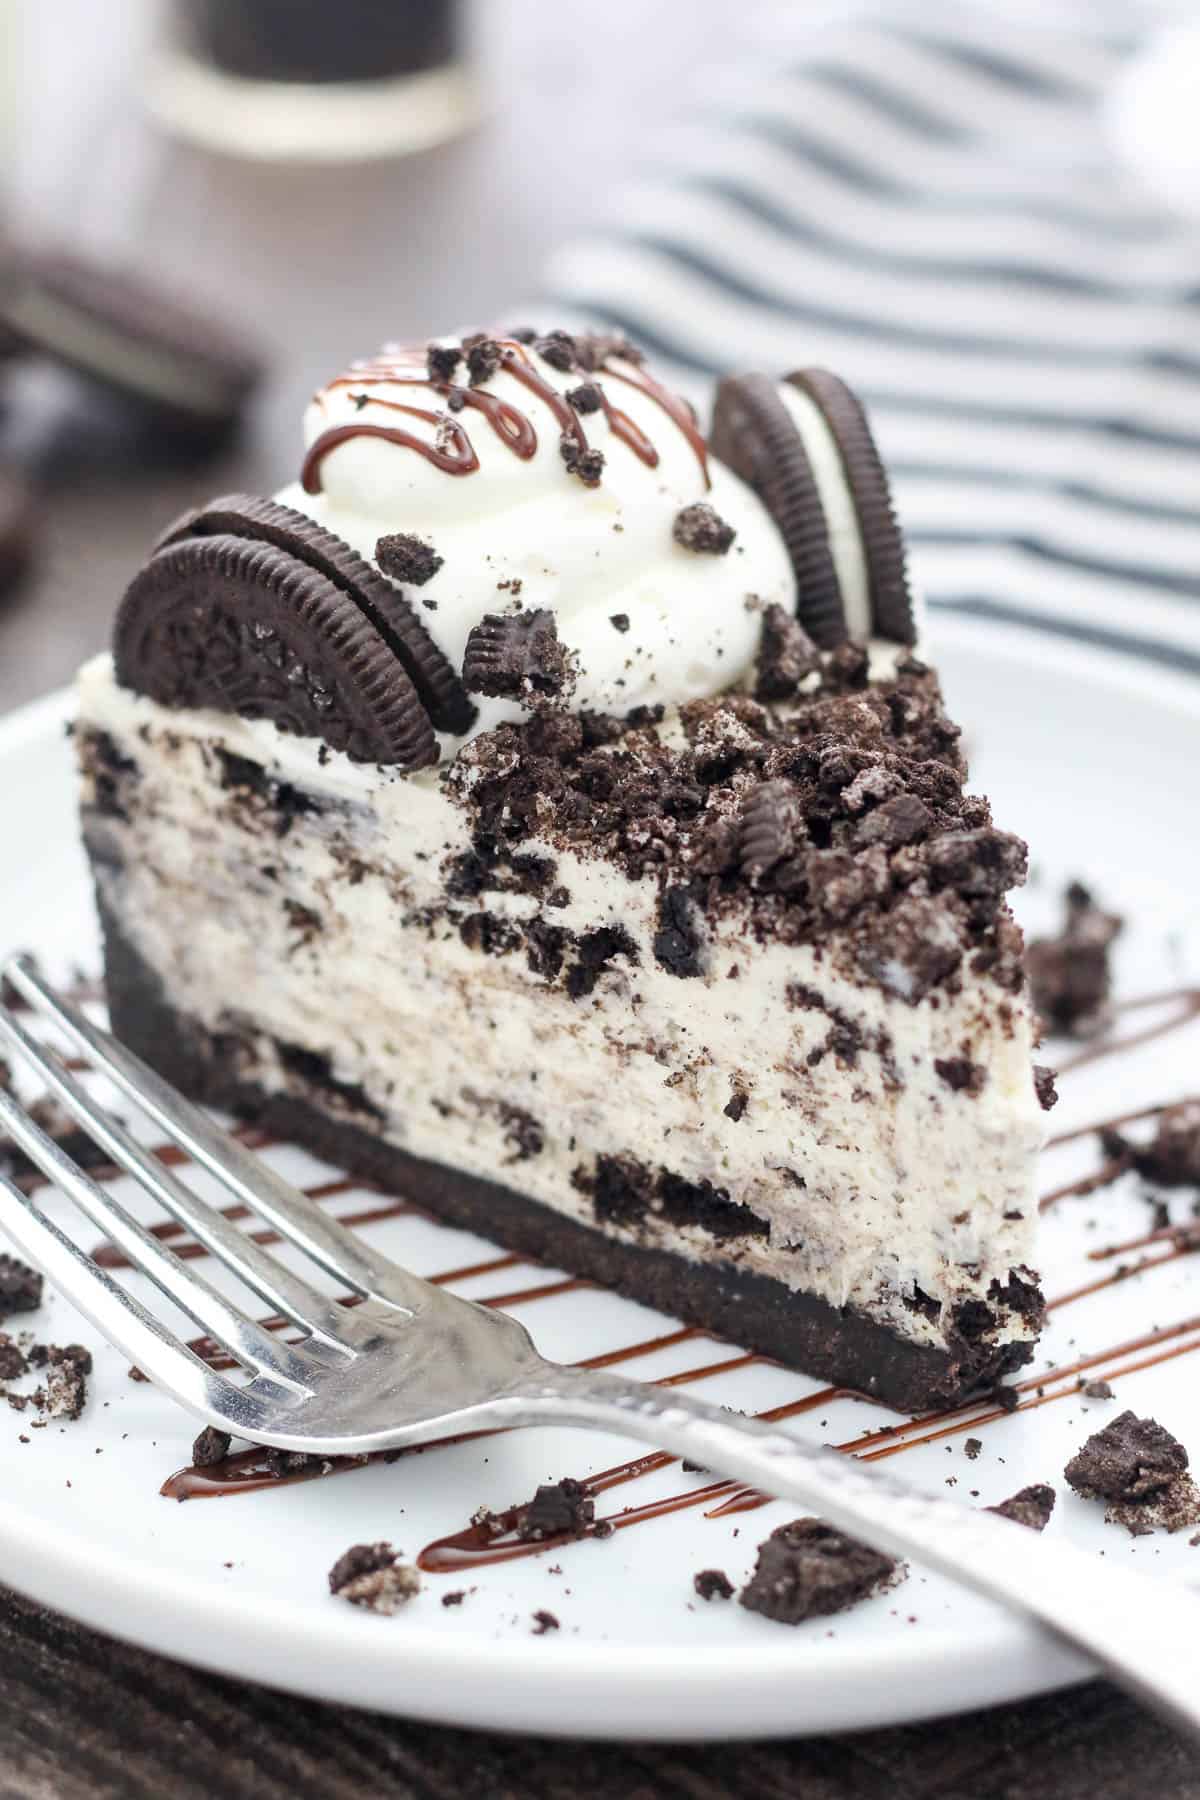 A slice of no-bake Oreo cheesecake on a white plate, topped with Oreos and drizzled with fudge sauce, next to a fork.